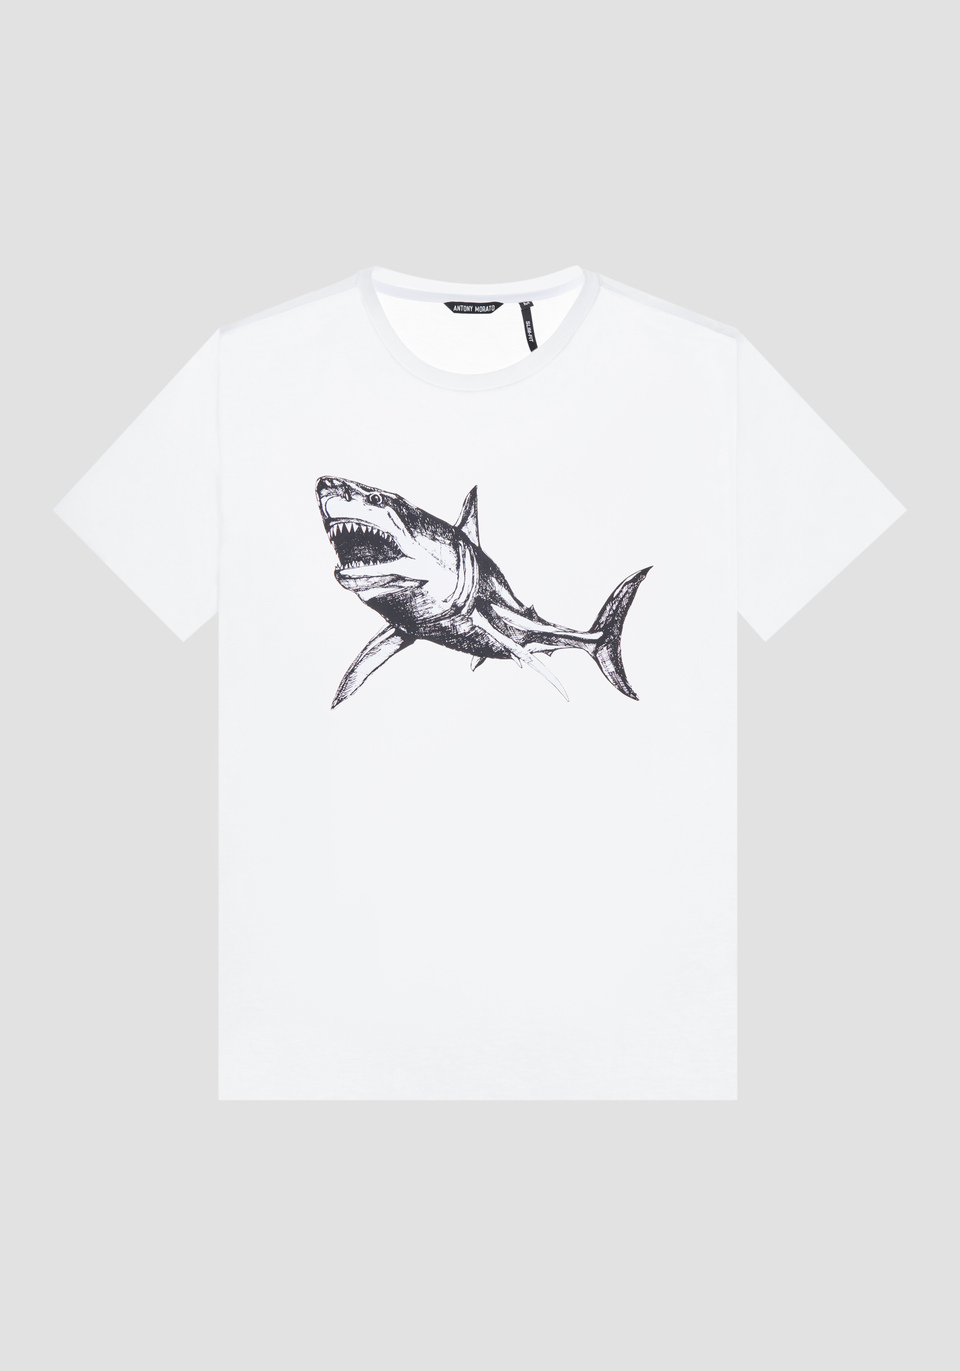 REGULAR-FIT T-SHIRT IN PURE COTTON WITH SHARK PRINT - Antony Morato Online Shop